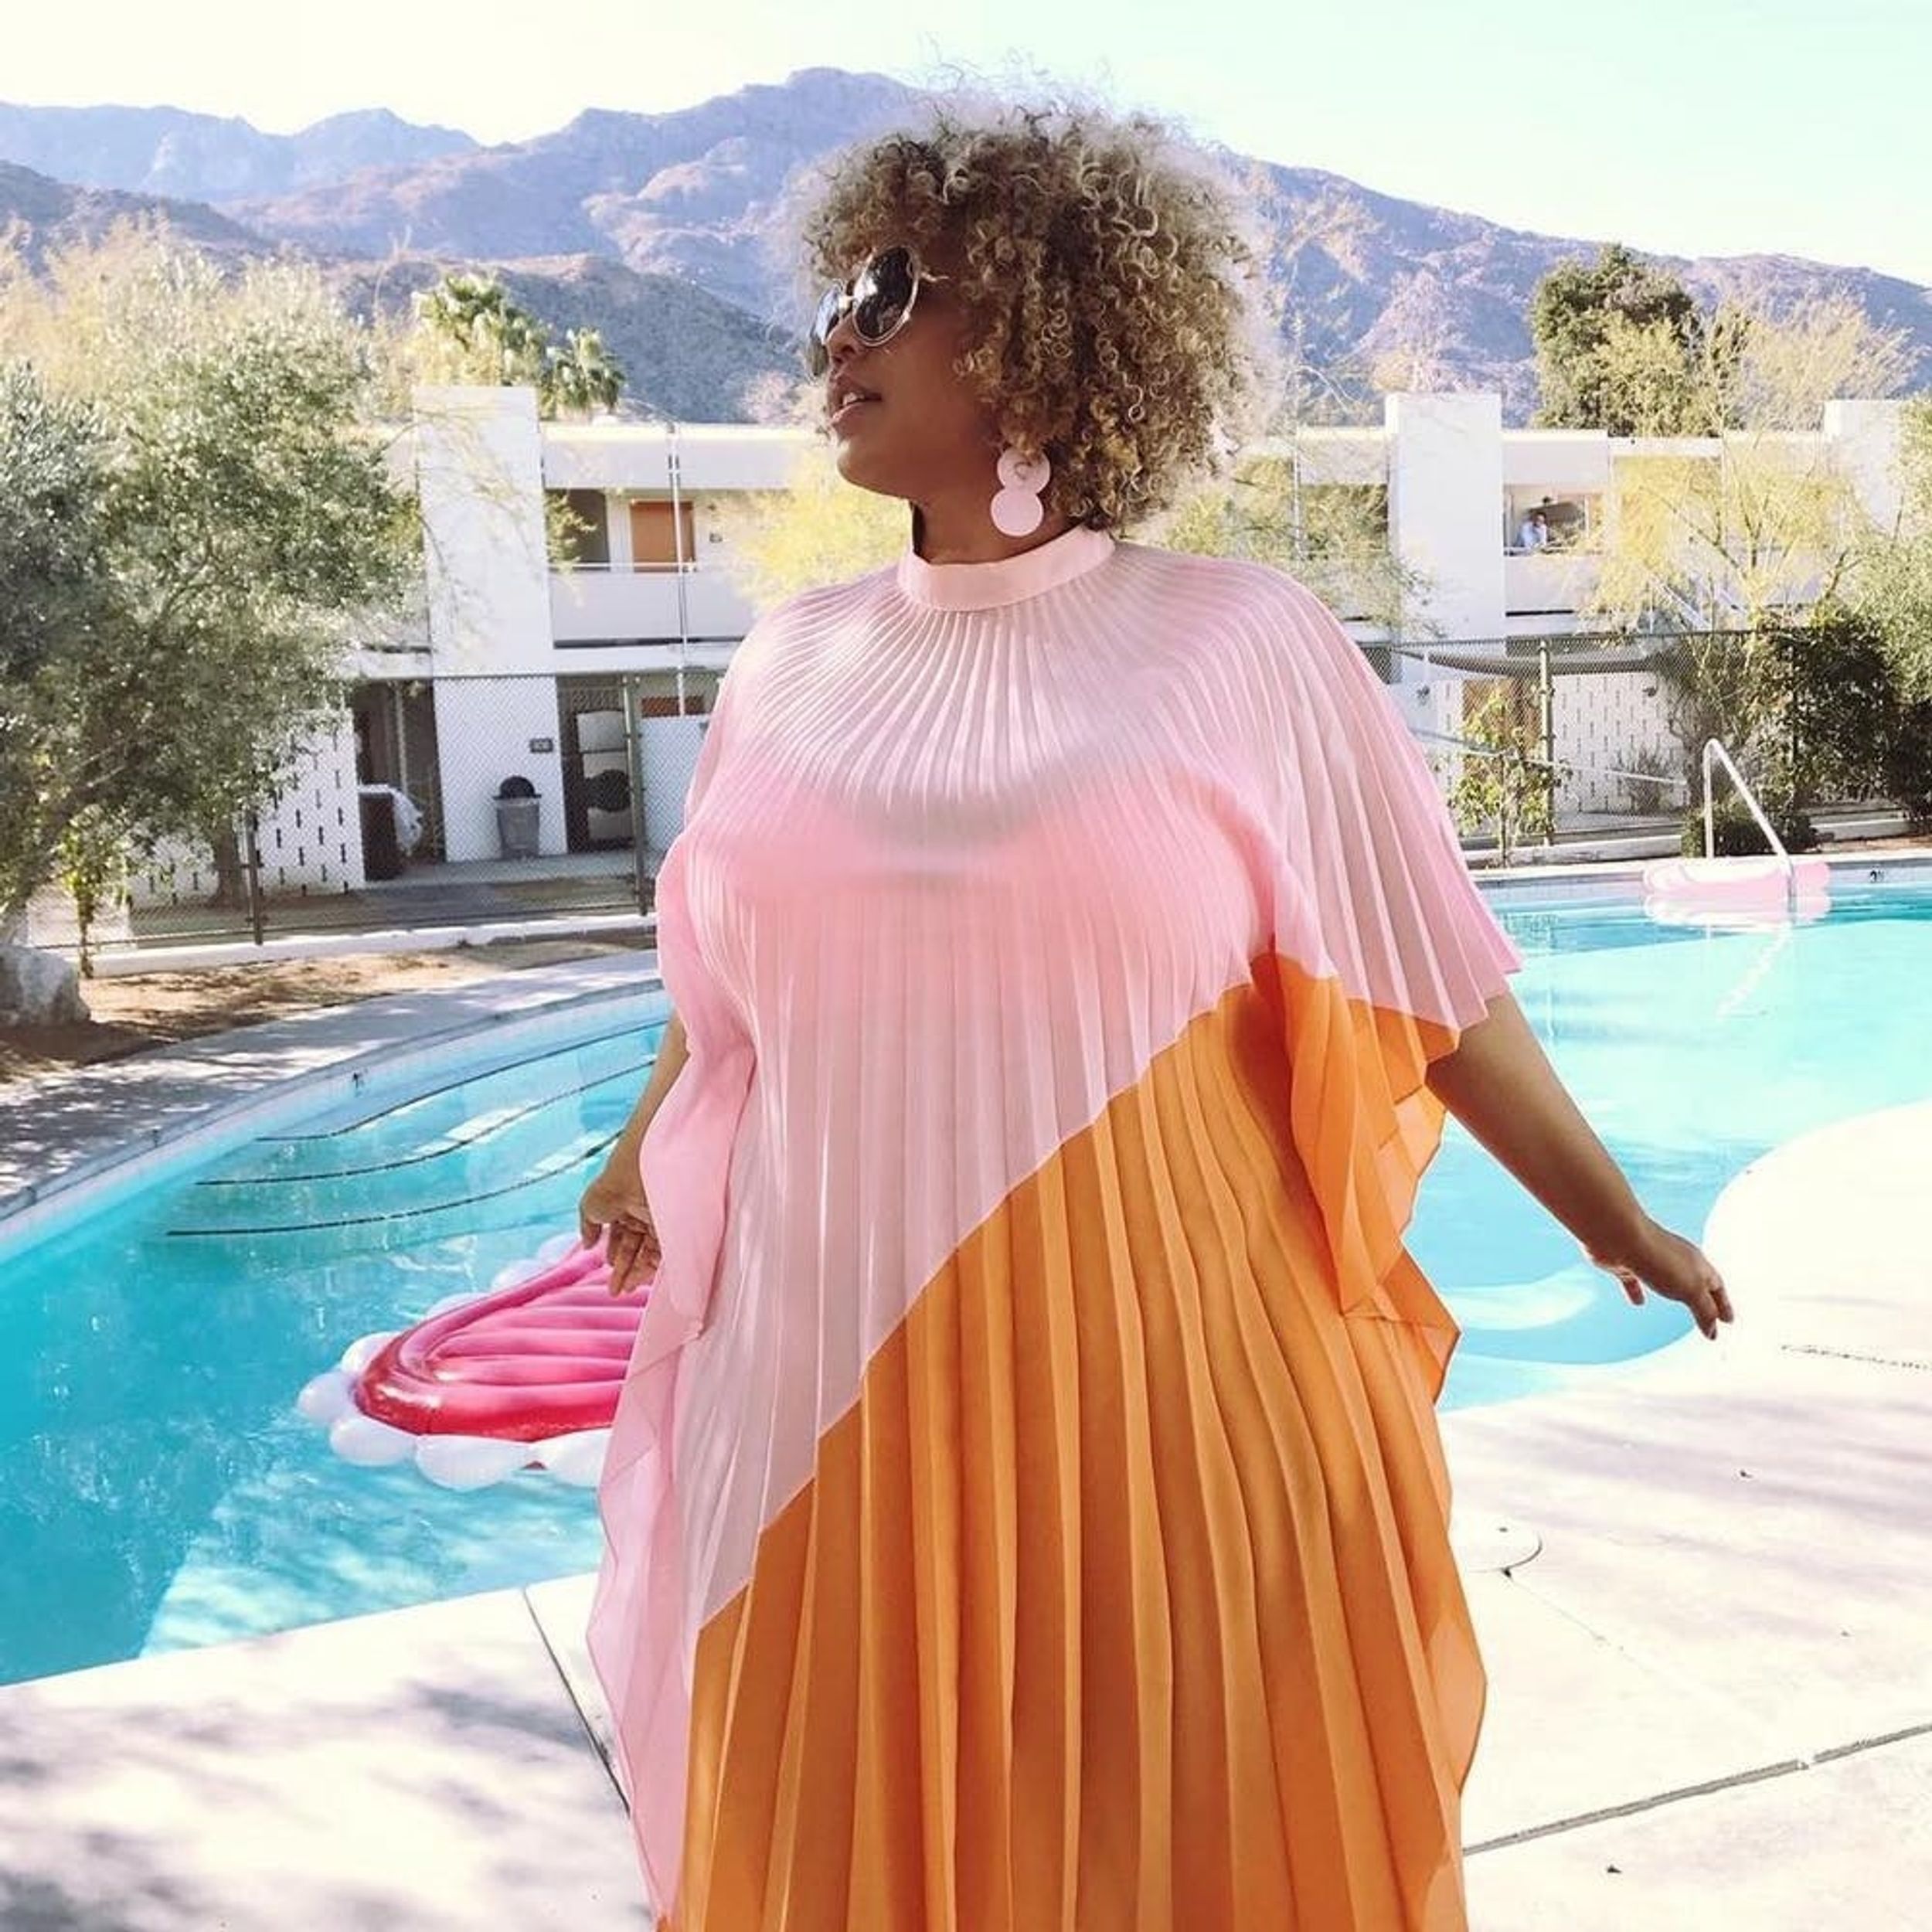 Here’s What 19 Influencers Are Wearing on Their Summer Vacations